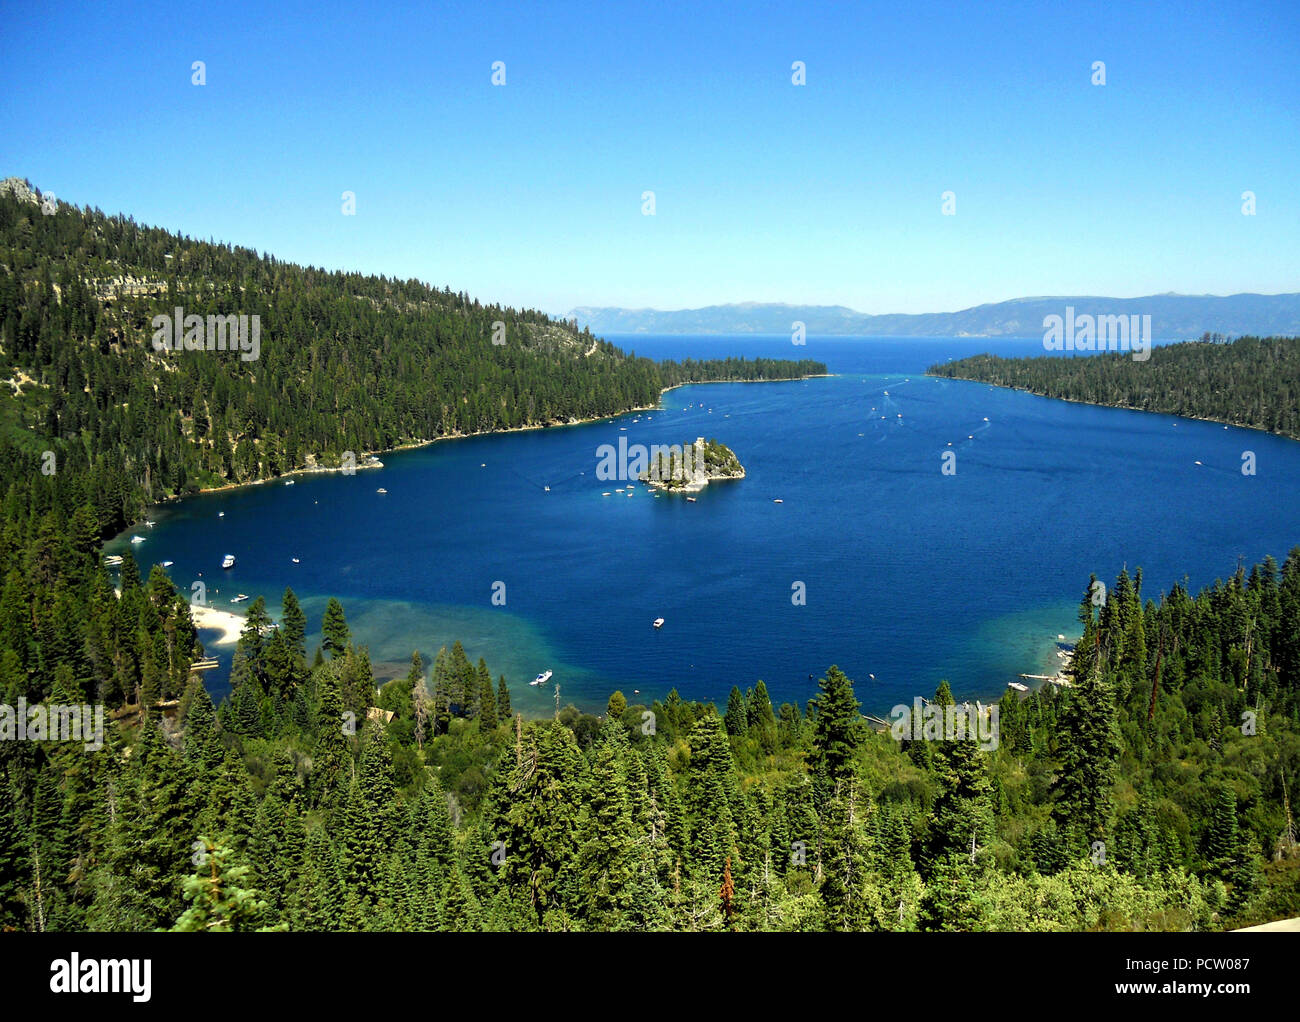 Emerald Bay South Lake Tahoe Banque D'Images